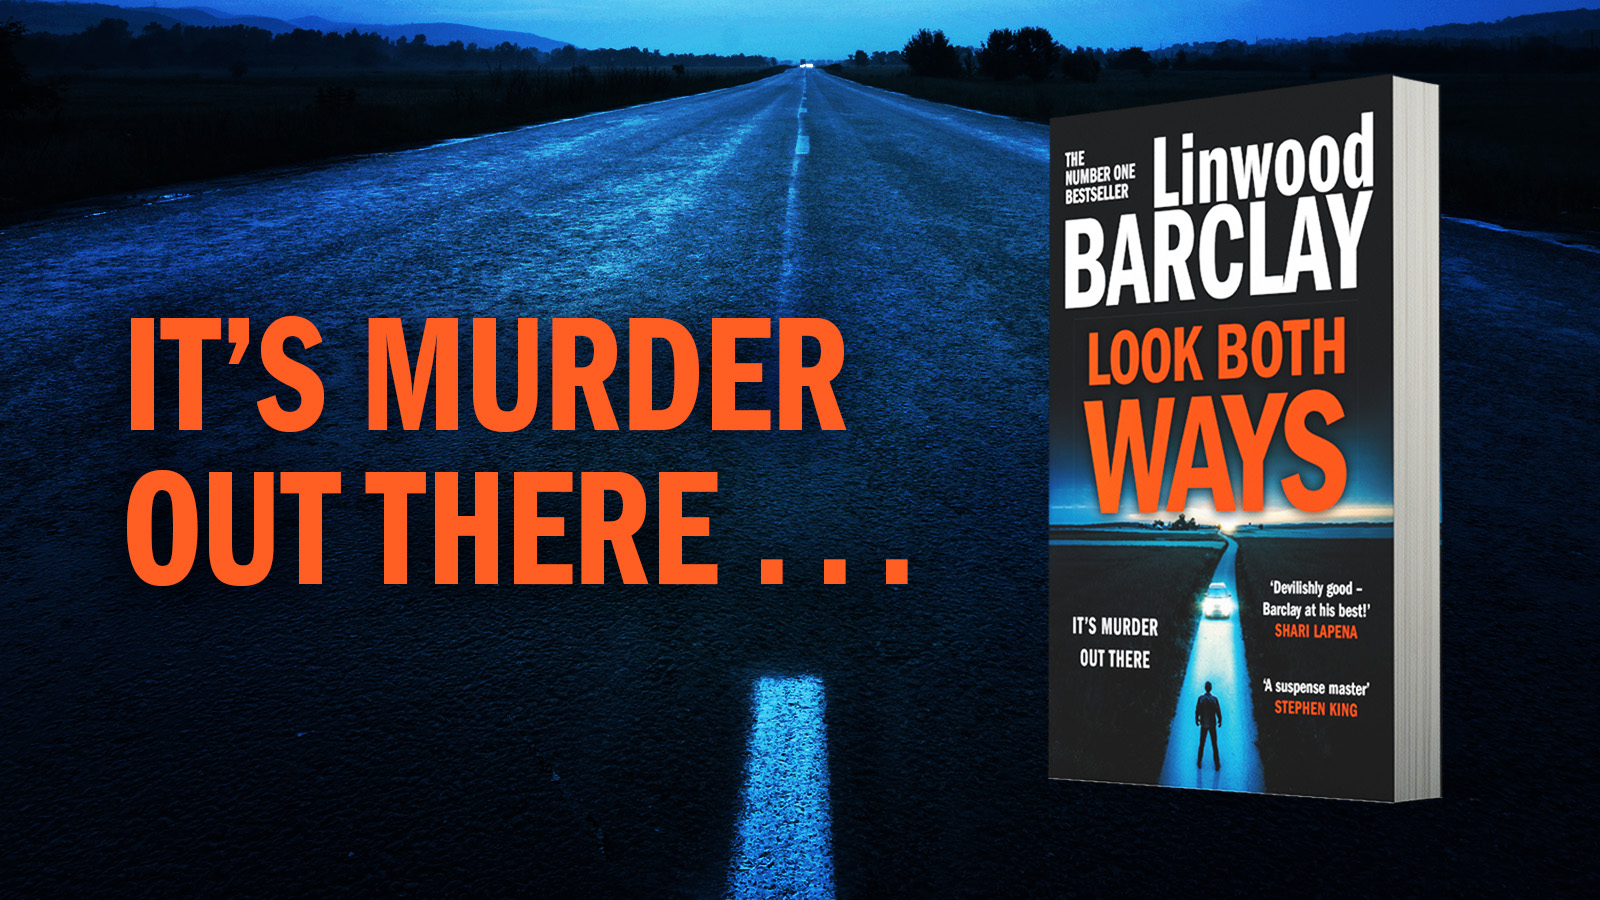 Look Both Ways, My Dad and Me by Linwood Barclay - 